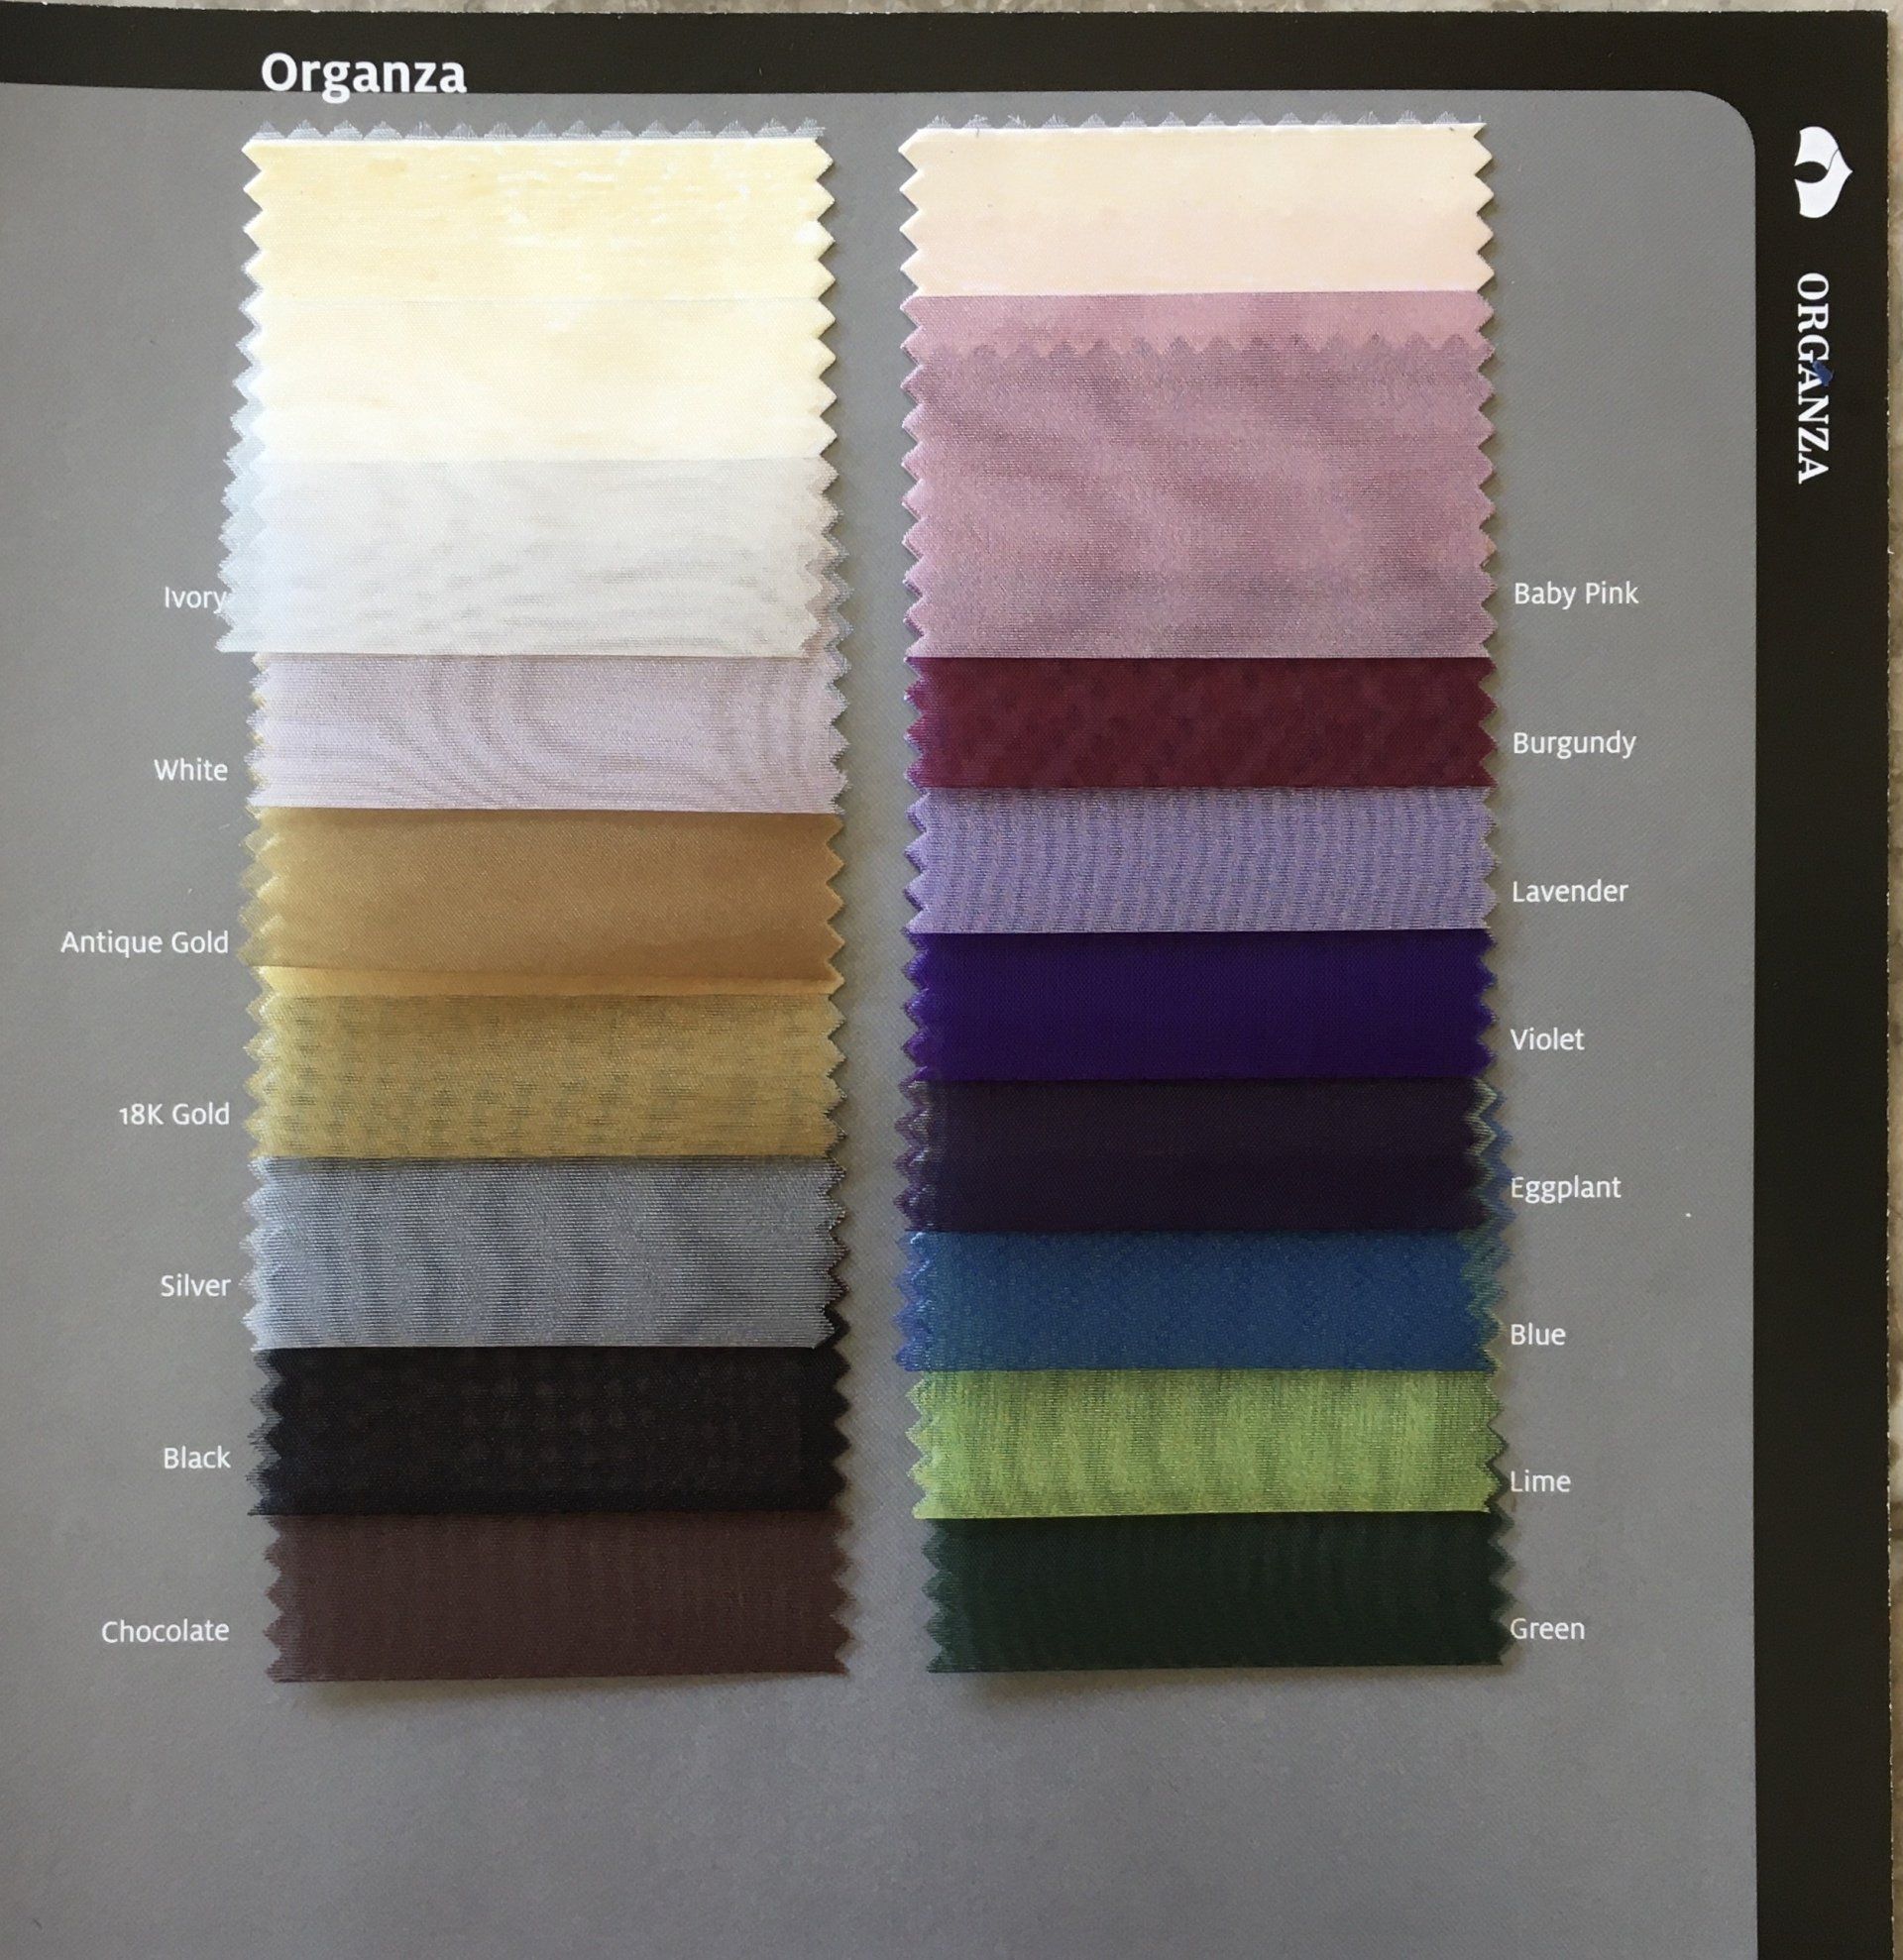 organza linen swatches, offered by Premier Wedding & Party Rental